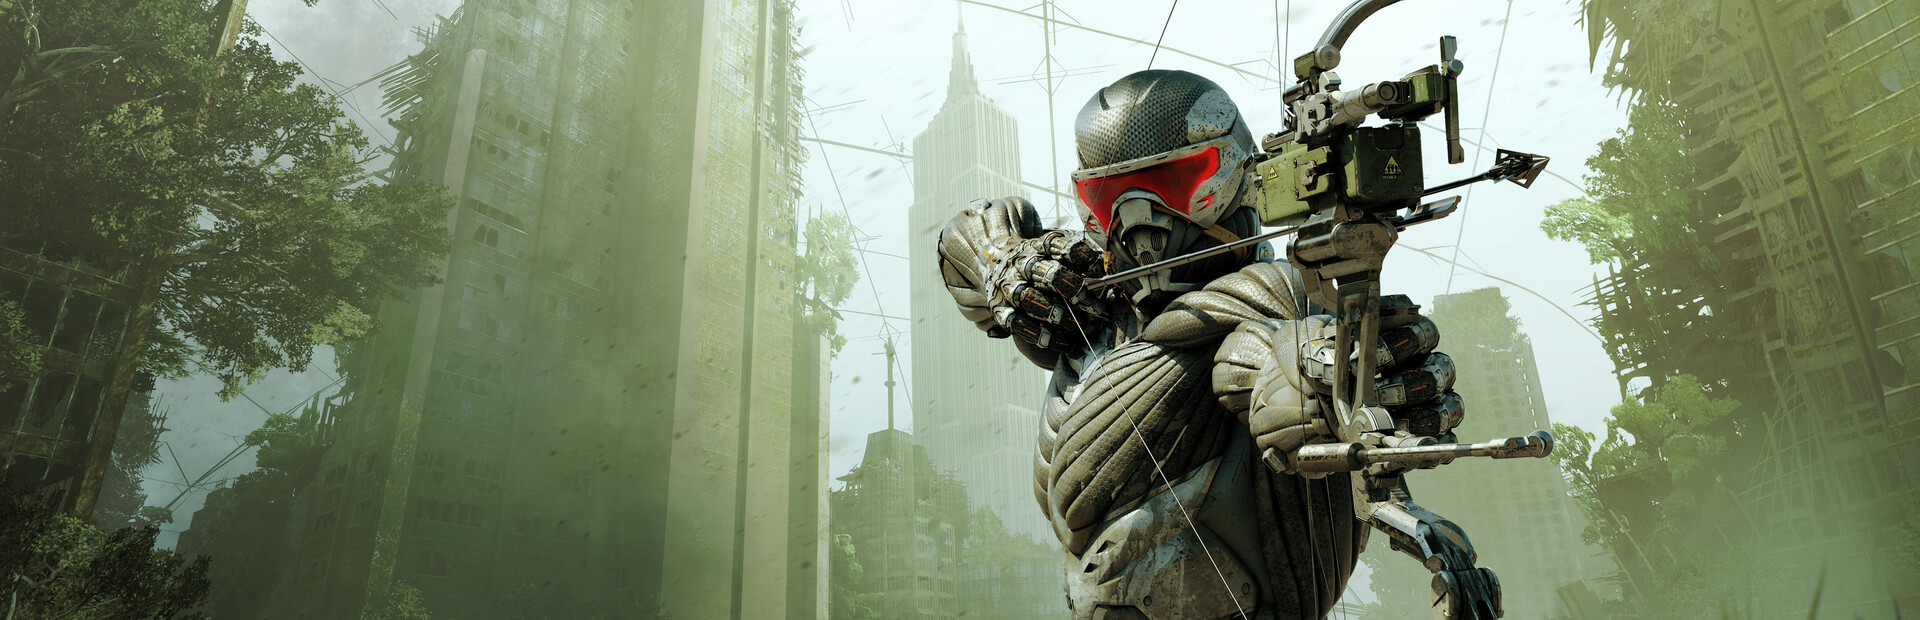 Crysis 3 Remastered cover image